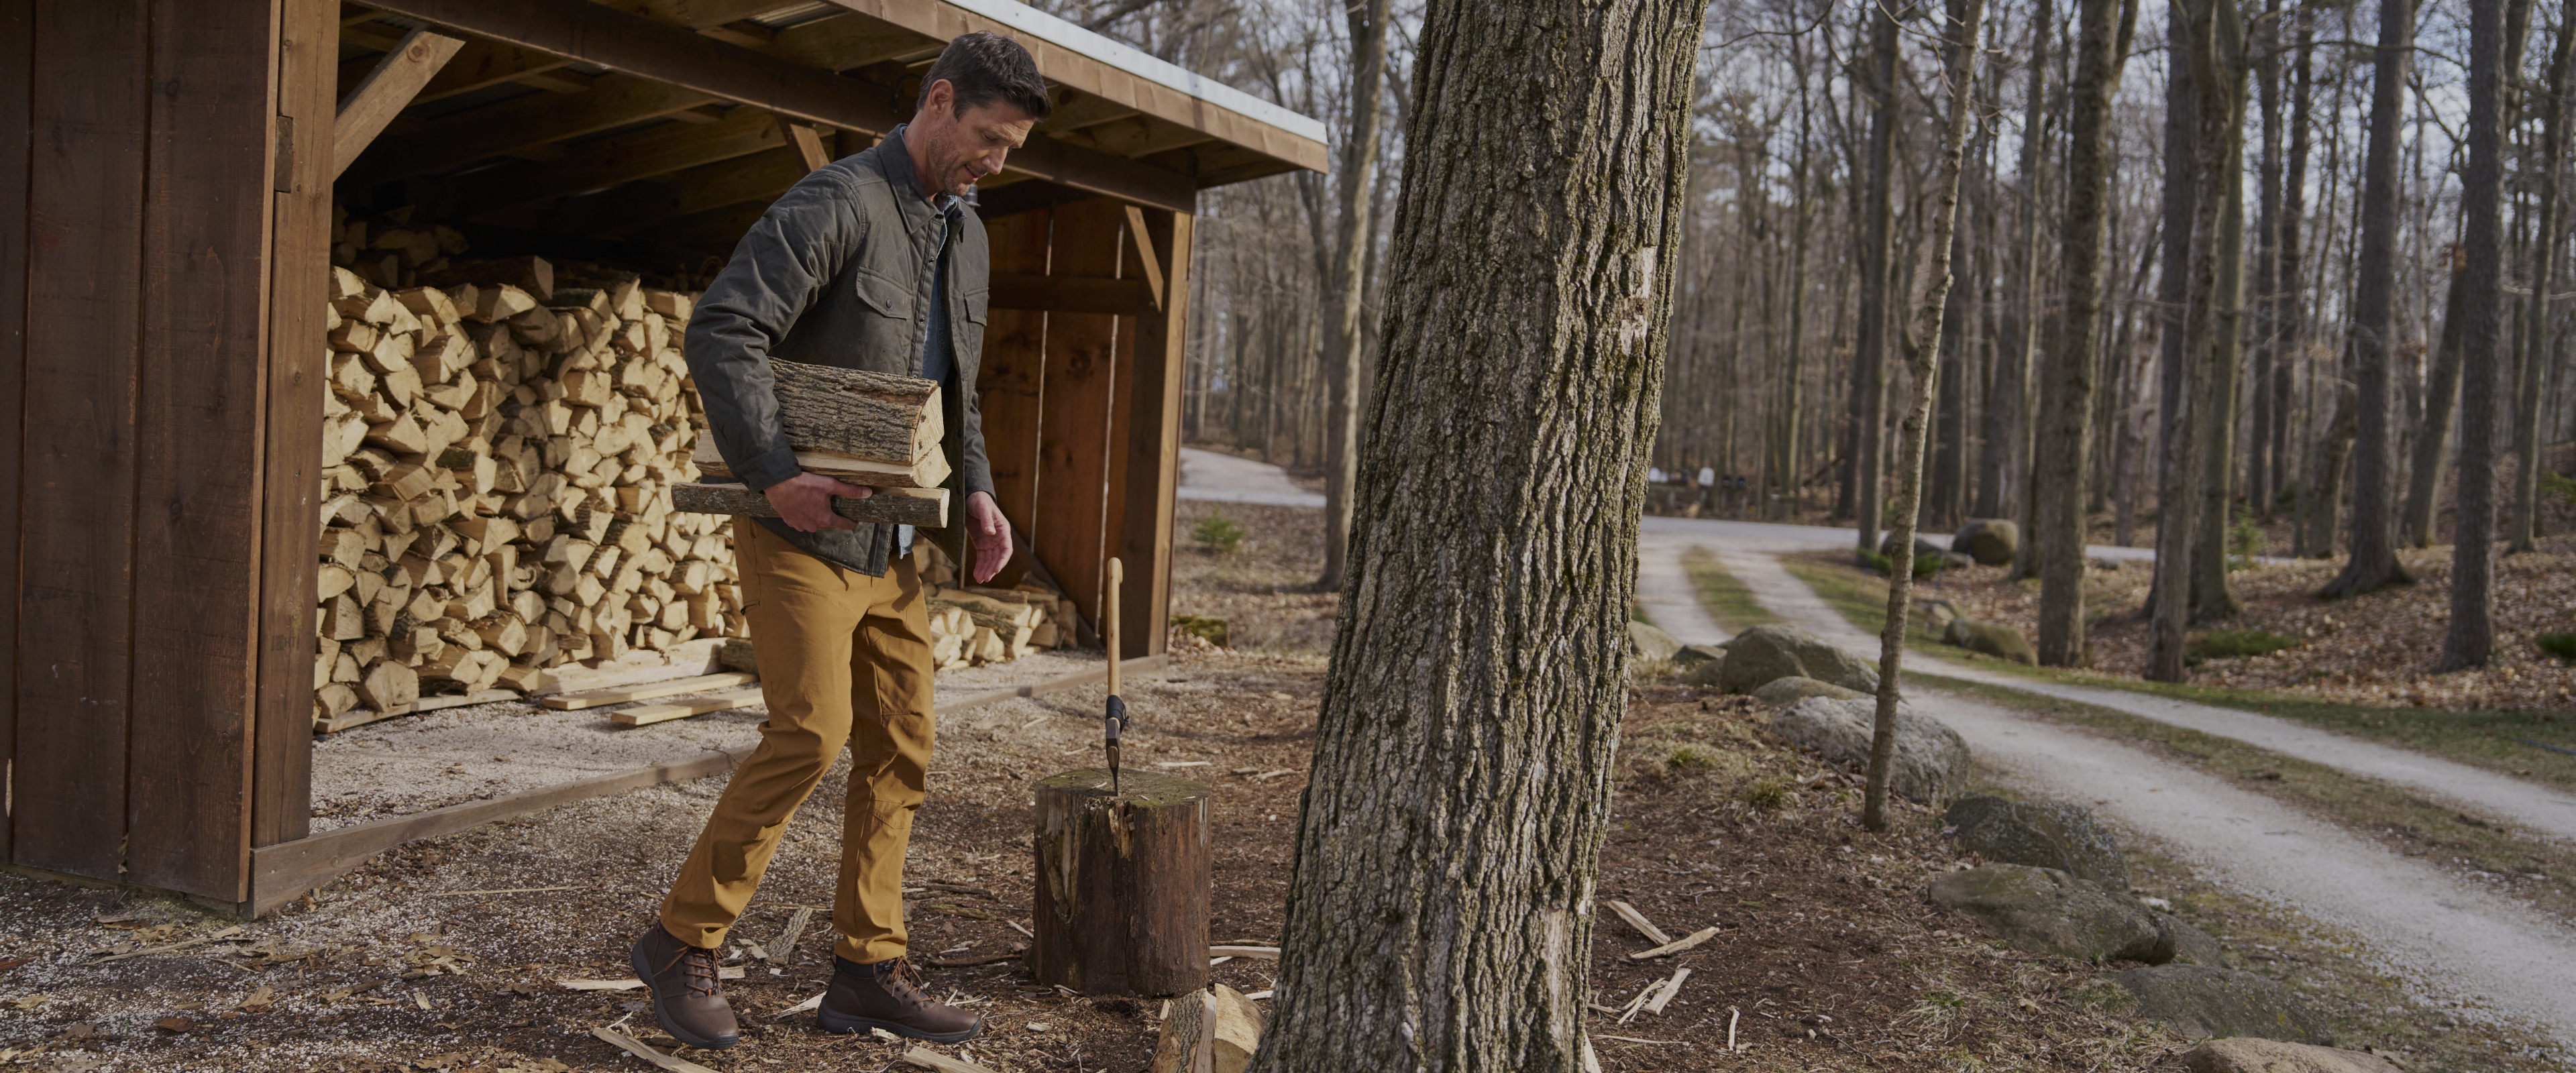 Click to shop Nunn Bush new arrivals. Image features the Excavate boot in brown.